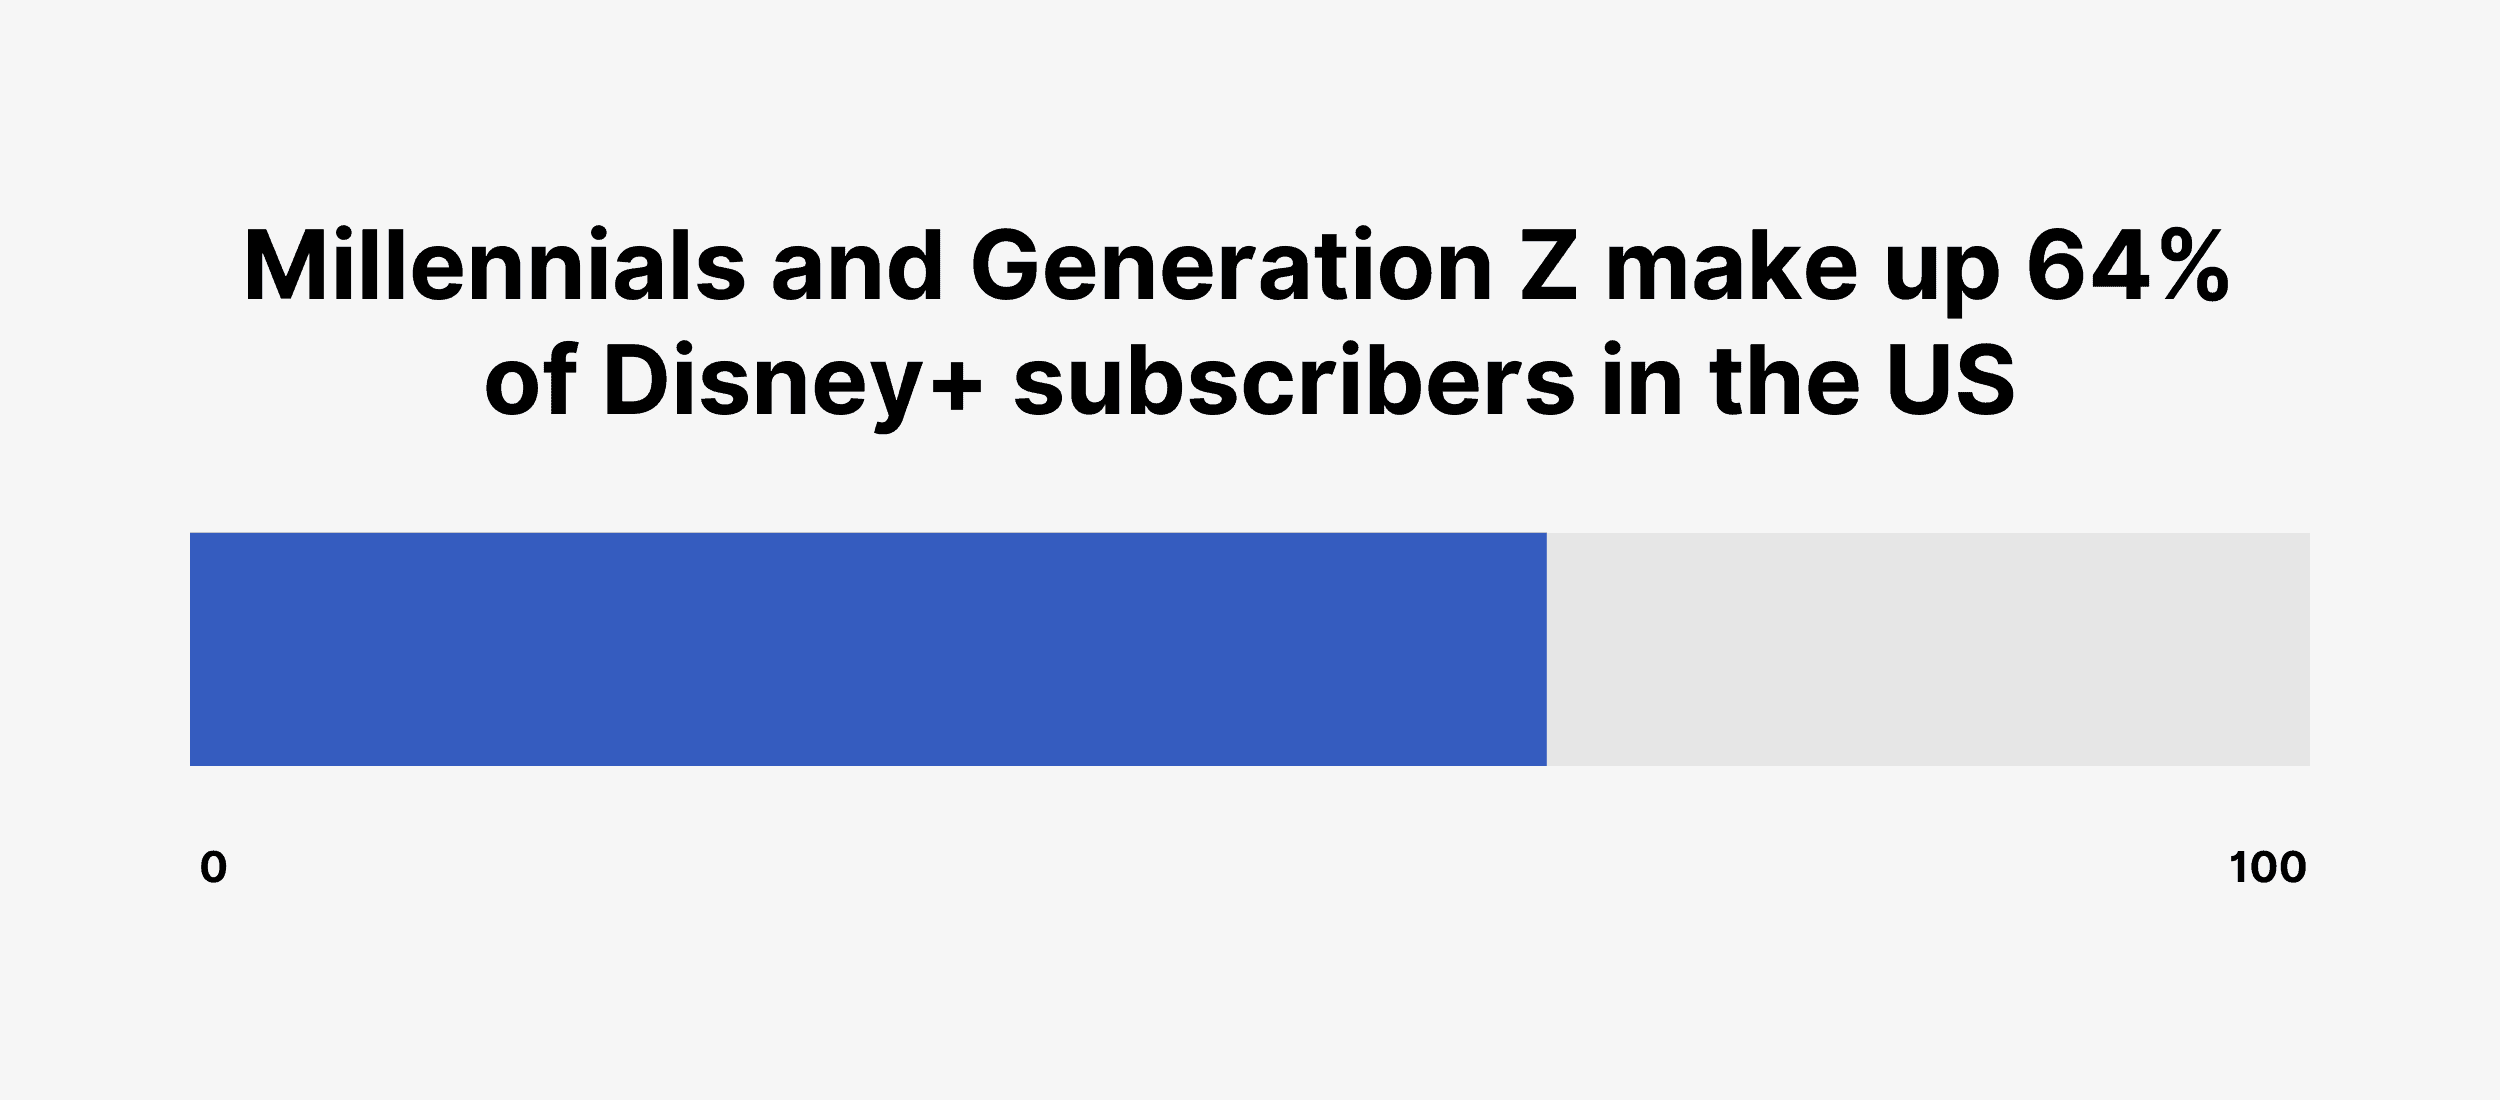 Millennials and Generation Z make up 64% of Disney+ subscribers in the US